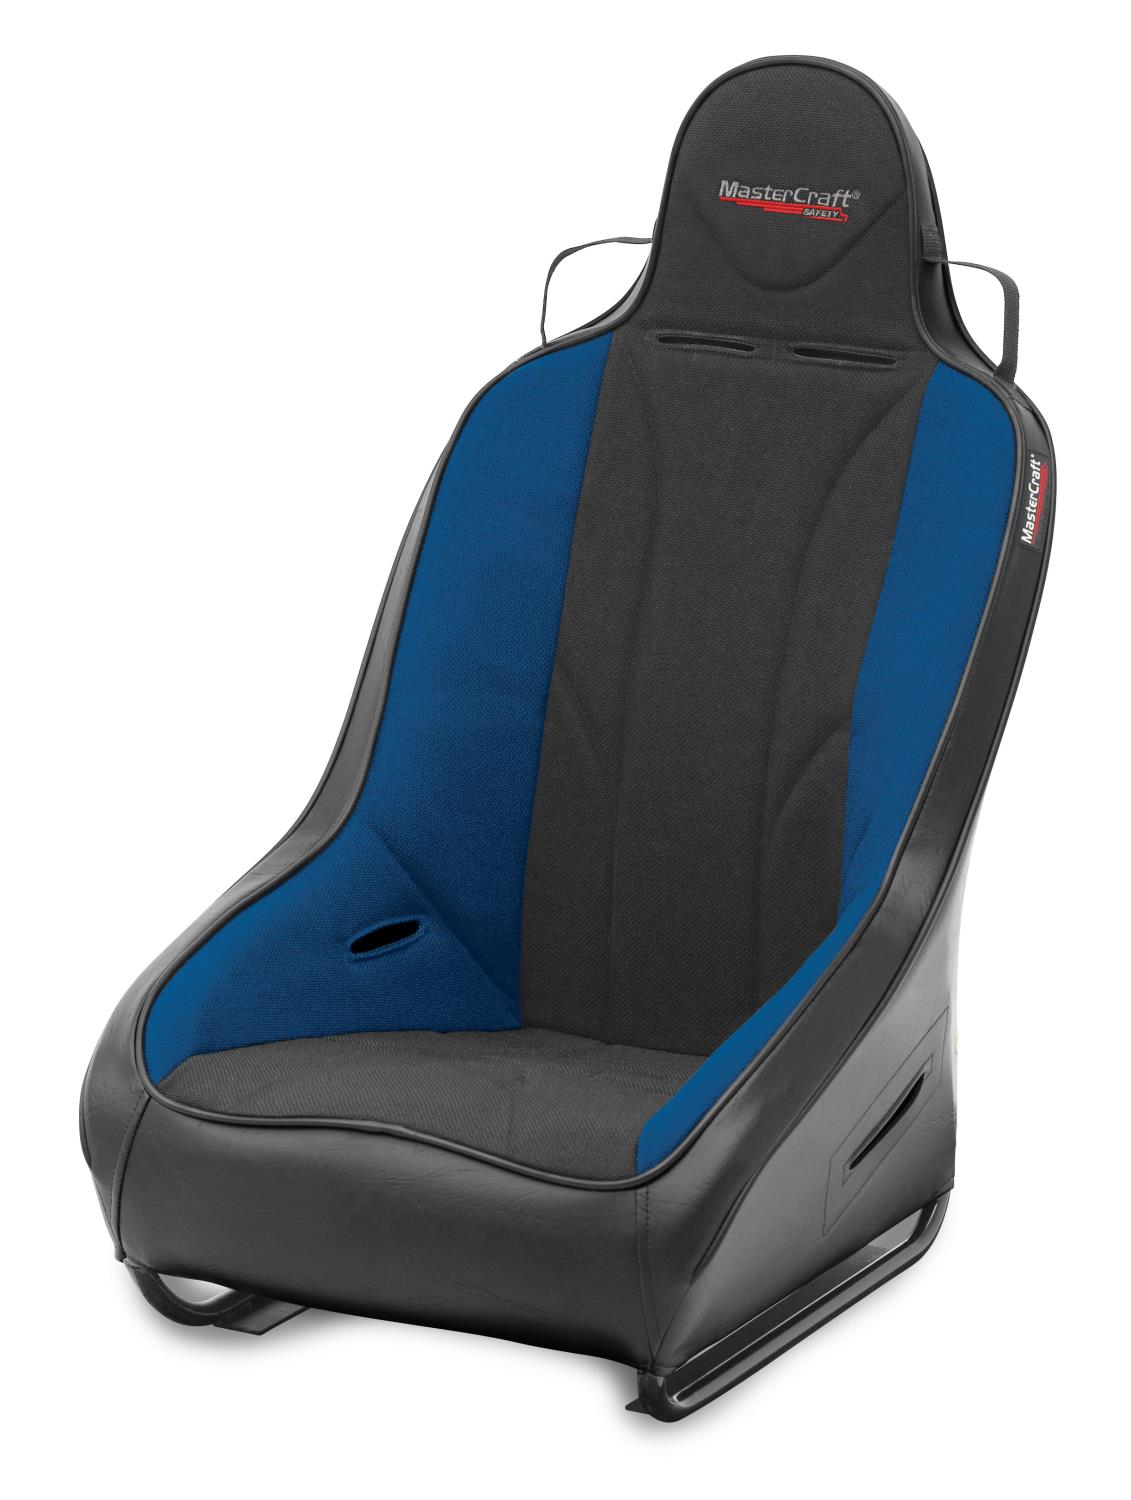 560213 2 in. WIDER PROSeat w/Fixed Headrest, Black w/ Black Fabric Center and Blue Side Panels, Black Band w/BRS Stitch